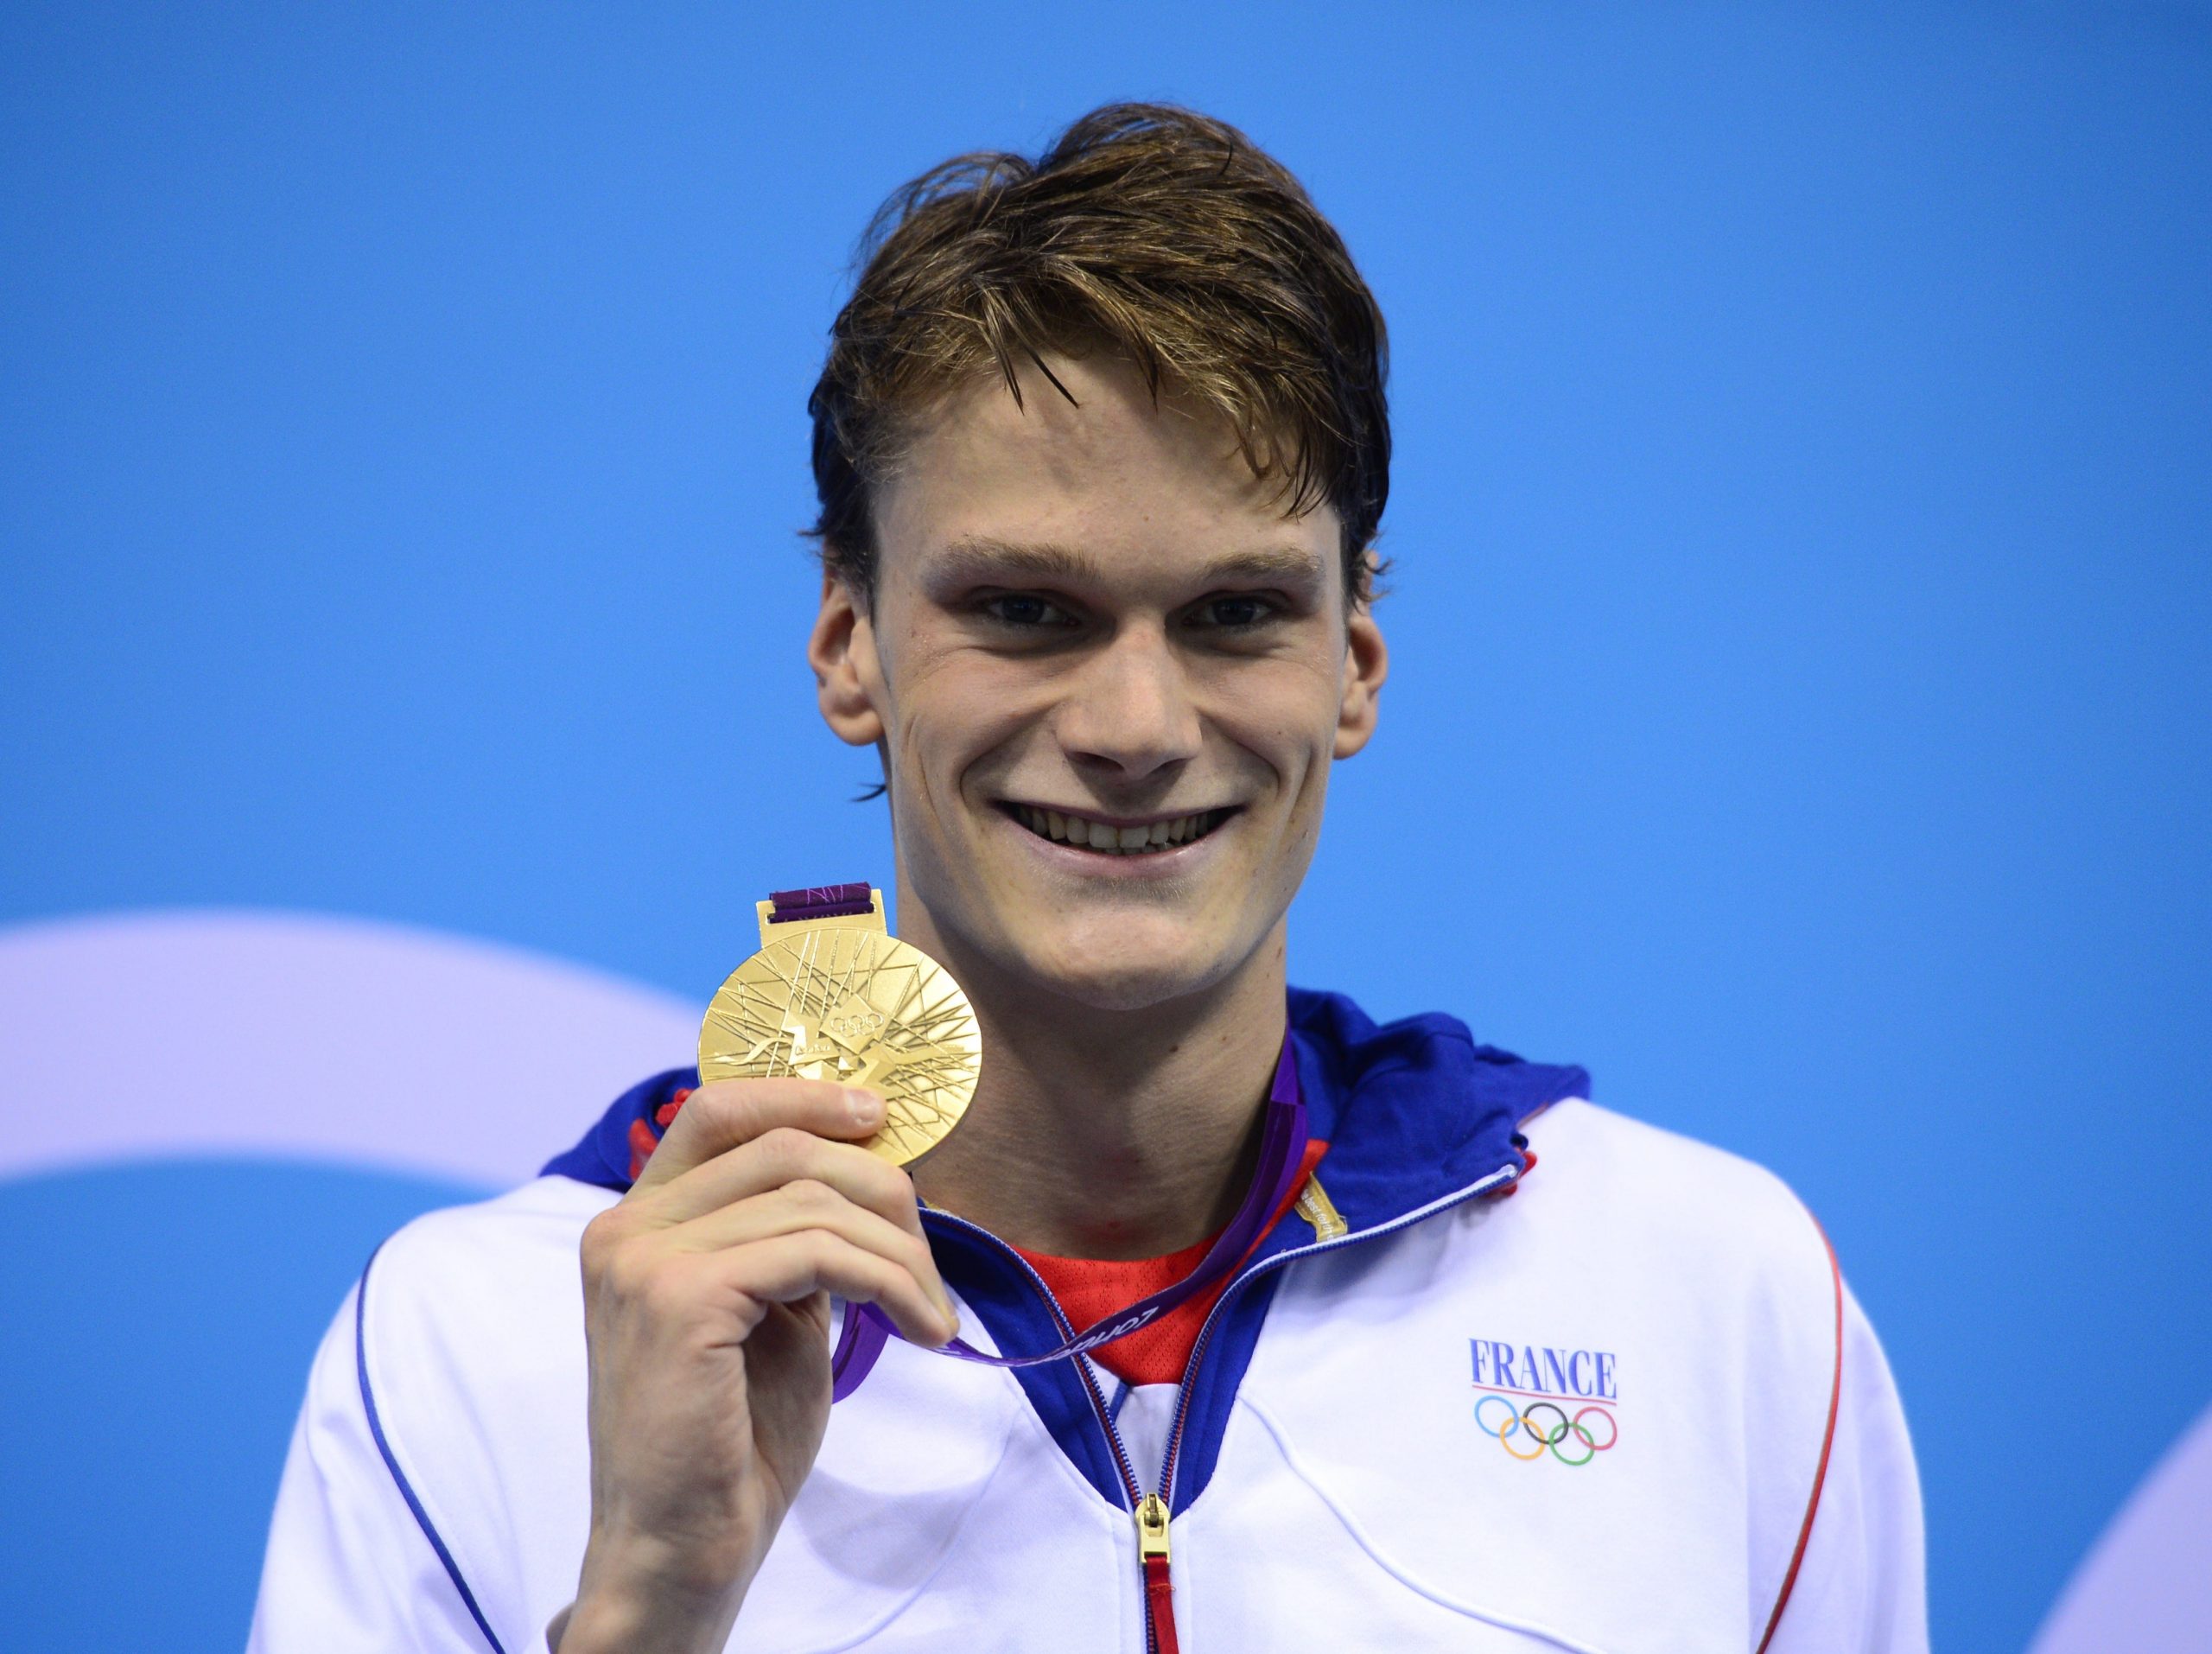 Yannick Agnel poses with his gold medal on the podium of the men's 200m freestyle swimming event at the London 2012 Olympic Games